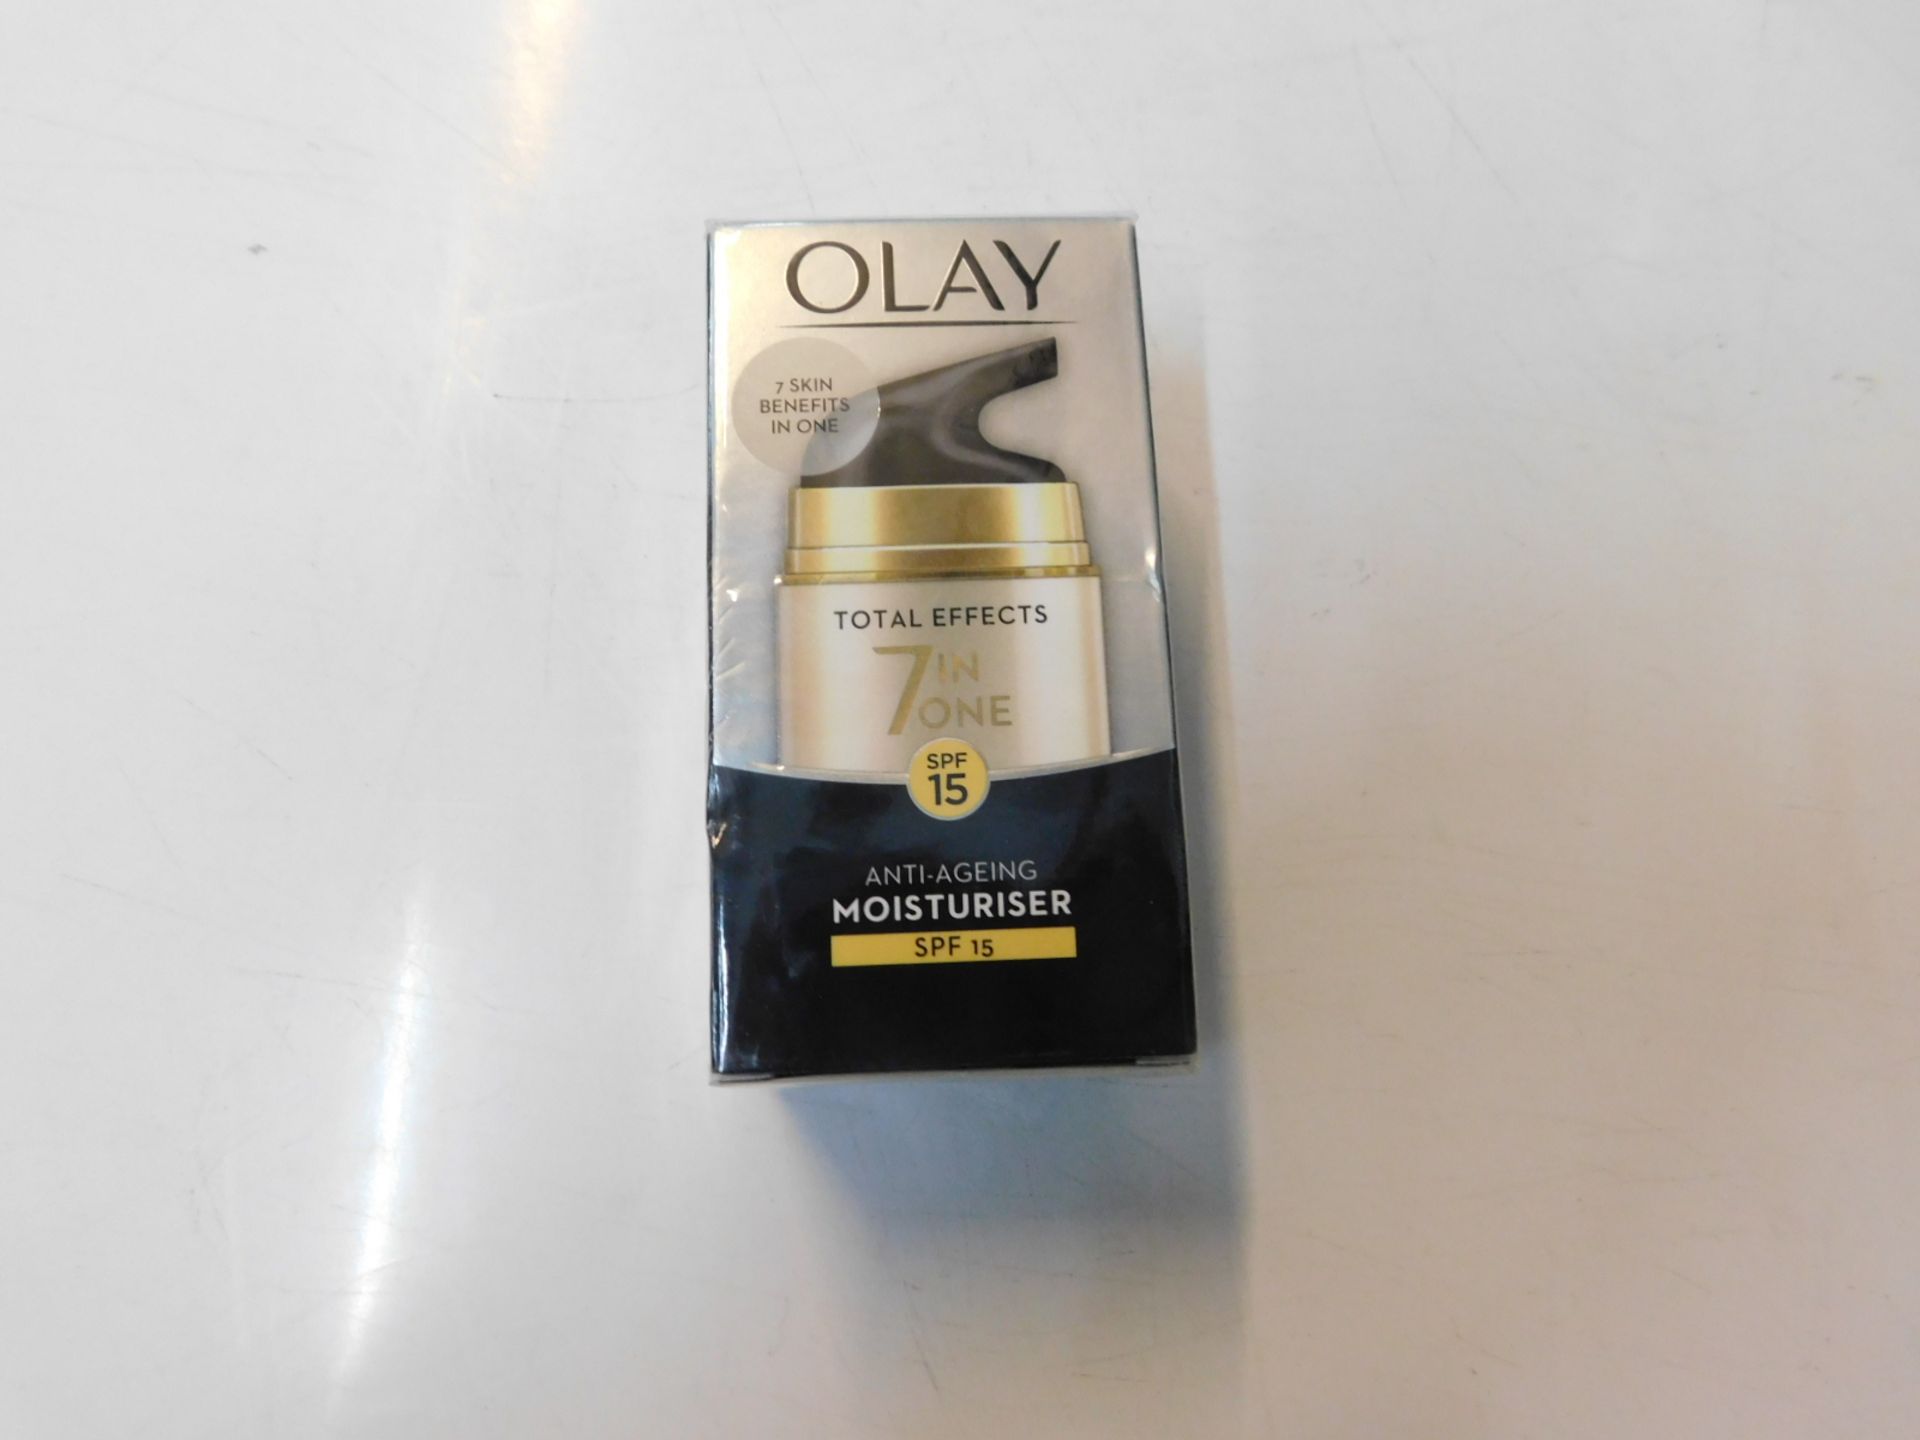 1 BRAND NEW SEALED BOX OF OLAY TOTAL EFFECTS 7 IN 1 MOISTURISER RRP Â£29.99